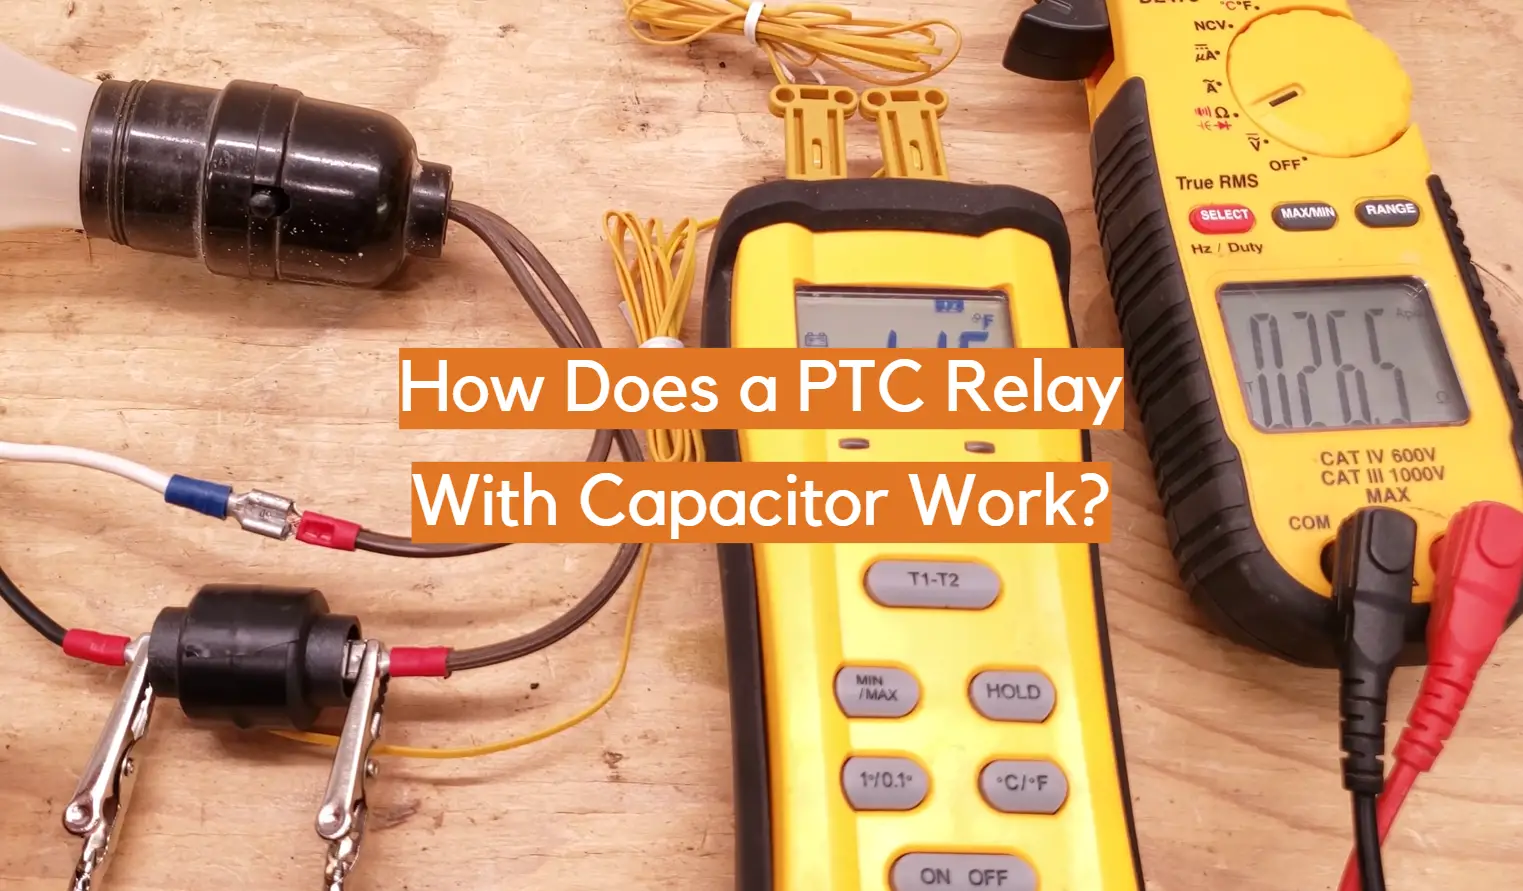 How Does a PTC Relay With Capacitor Work?